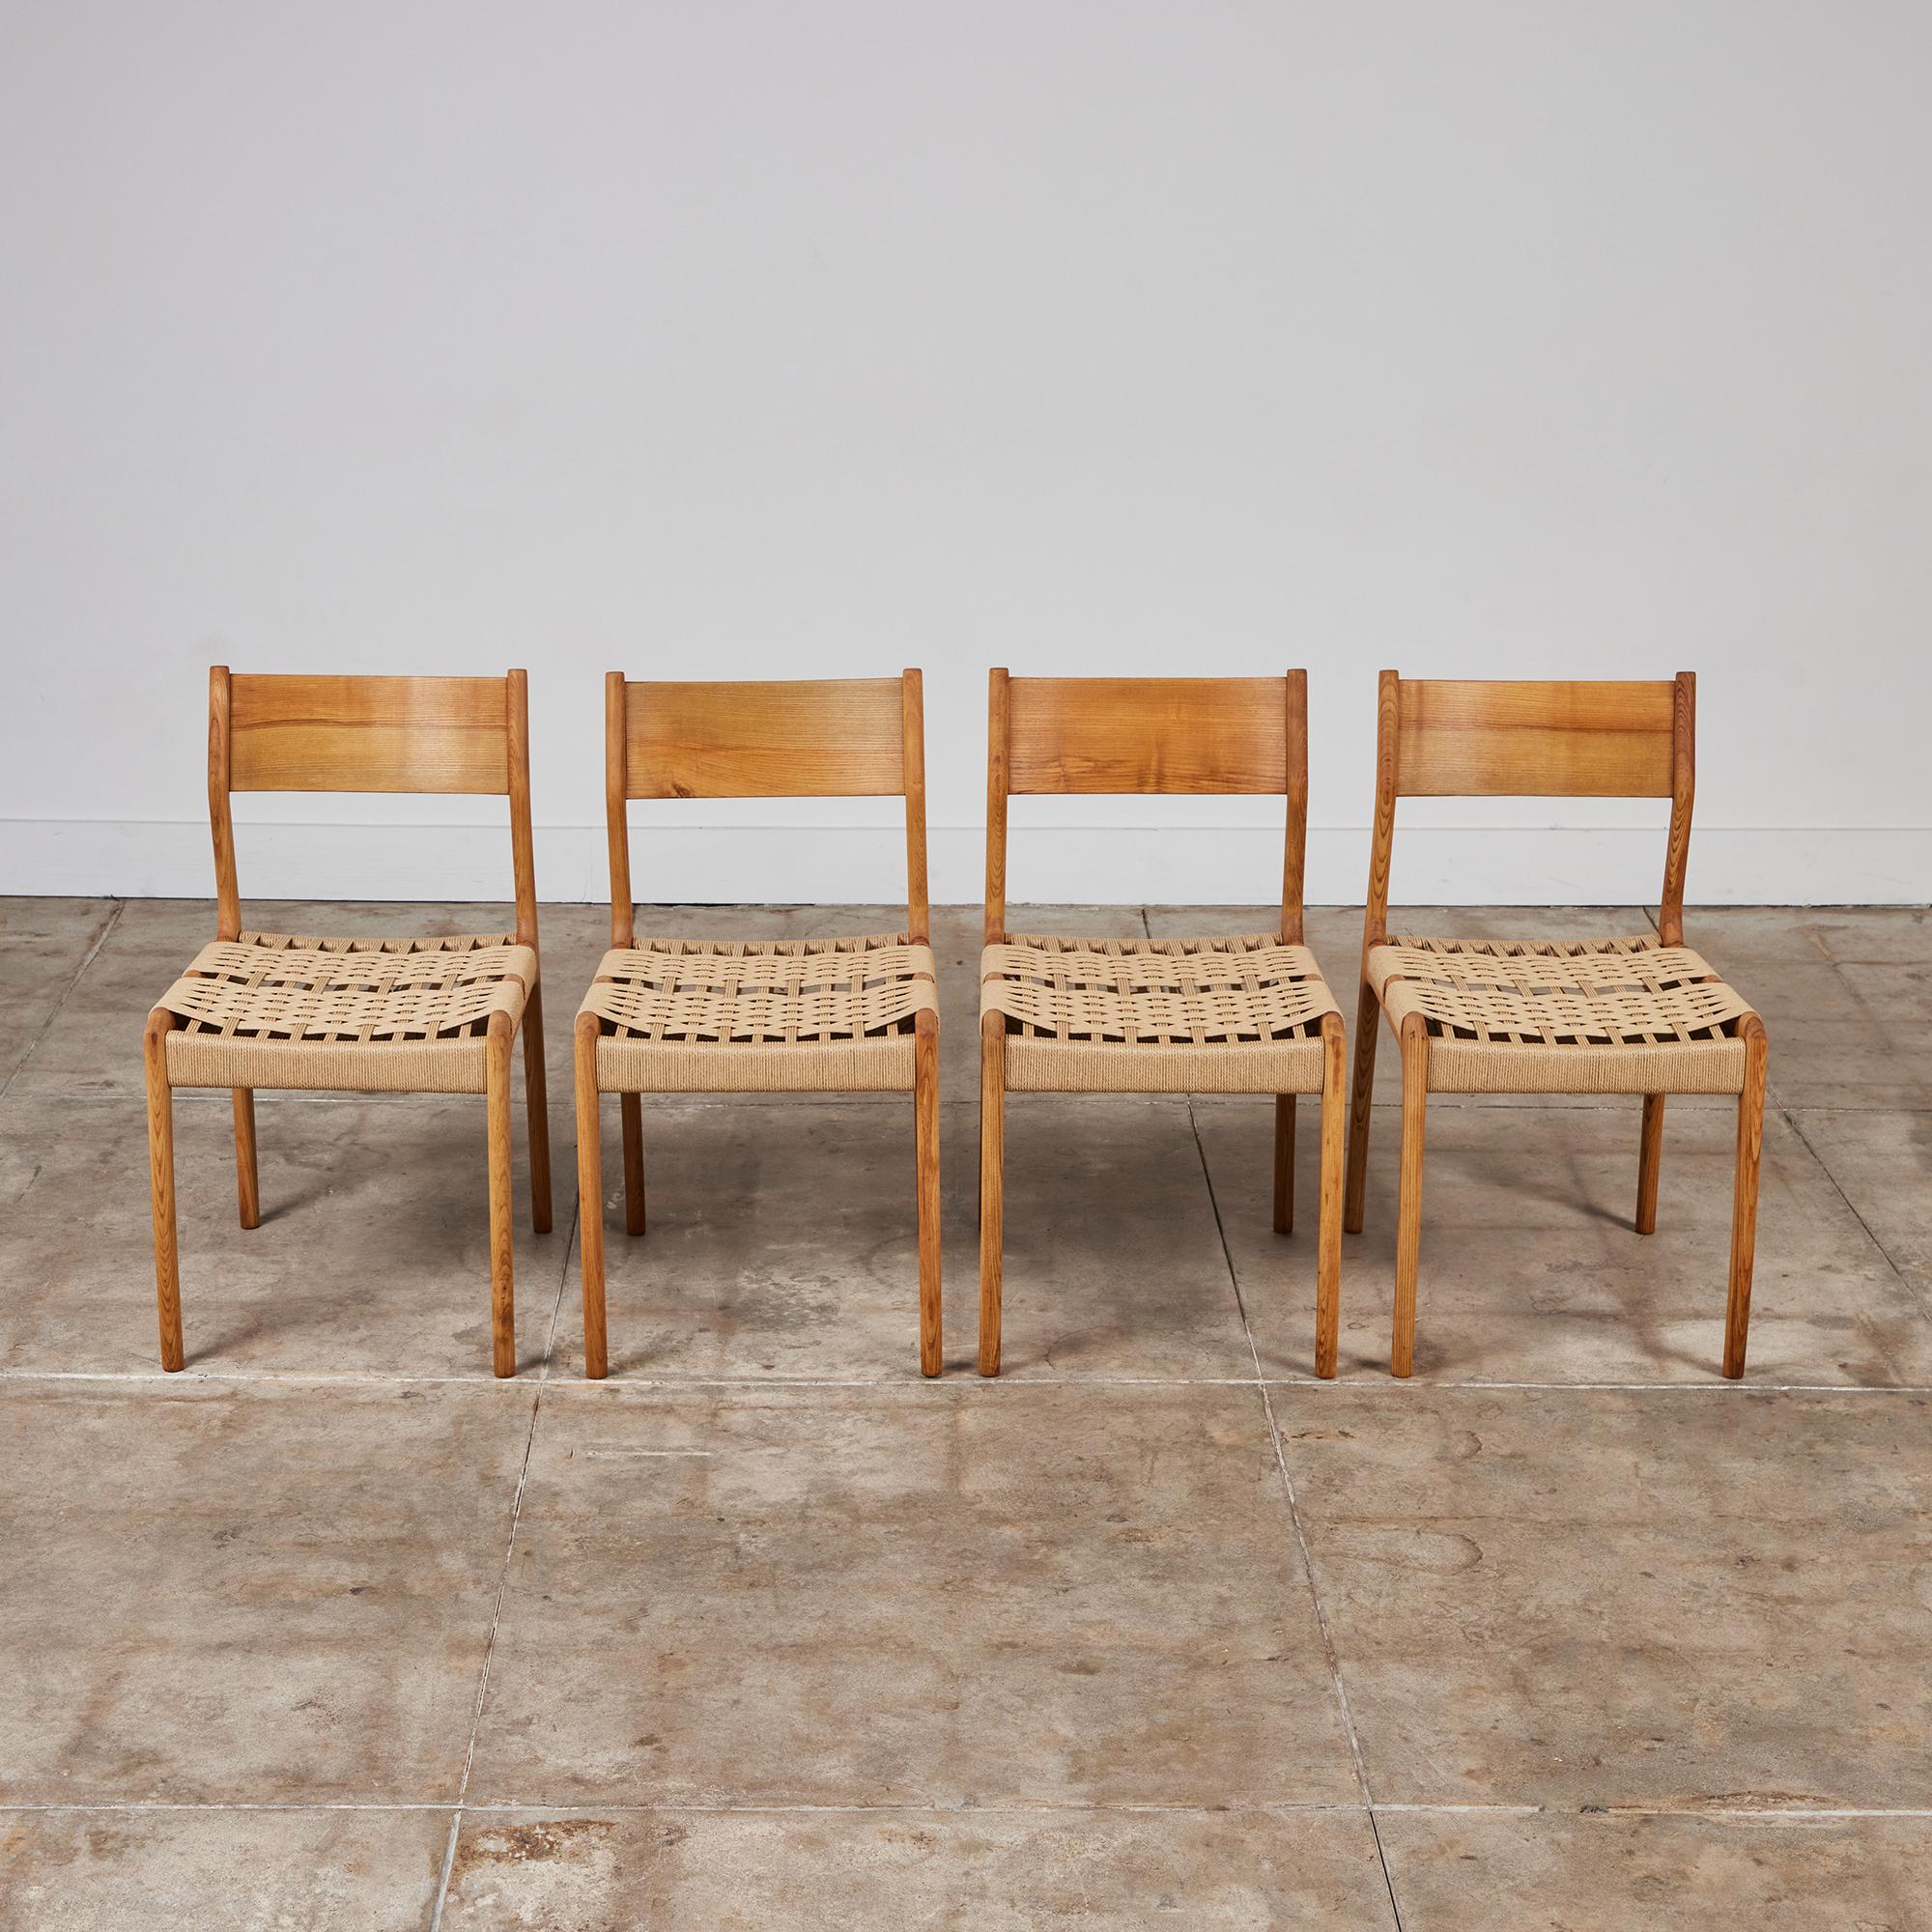 Set of four Italian side dining chairs by Consorzio Sedie Friuli c.1960s, Italy. The oak chairs feature a wide, curved backrest and hand woven seat in natural Danish paper cord.  

Dimensions
18